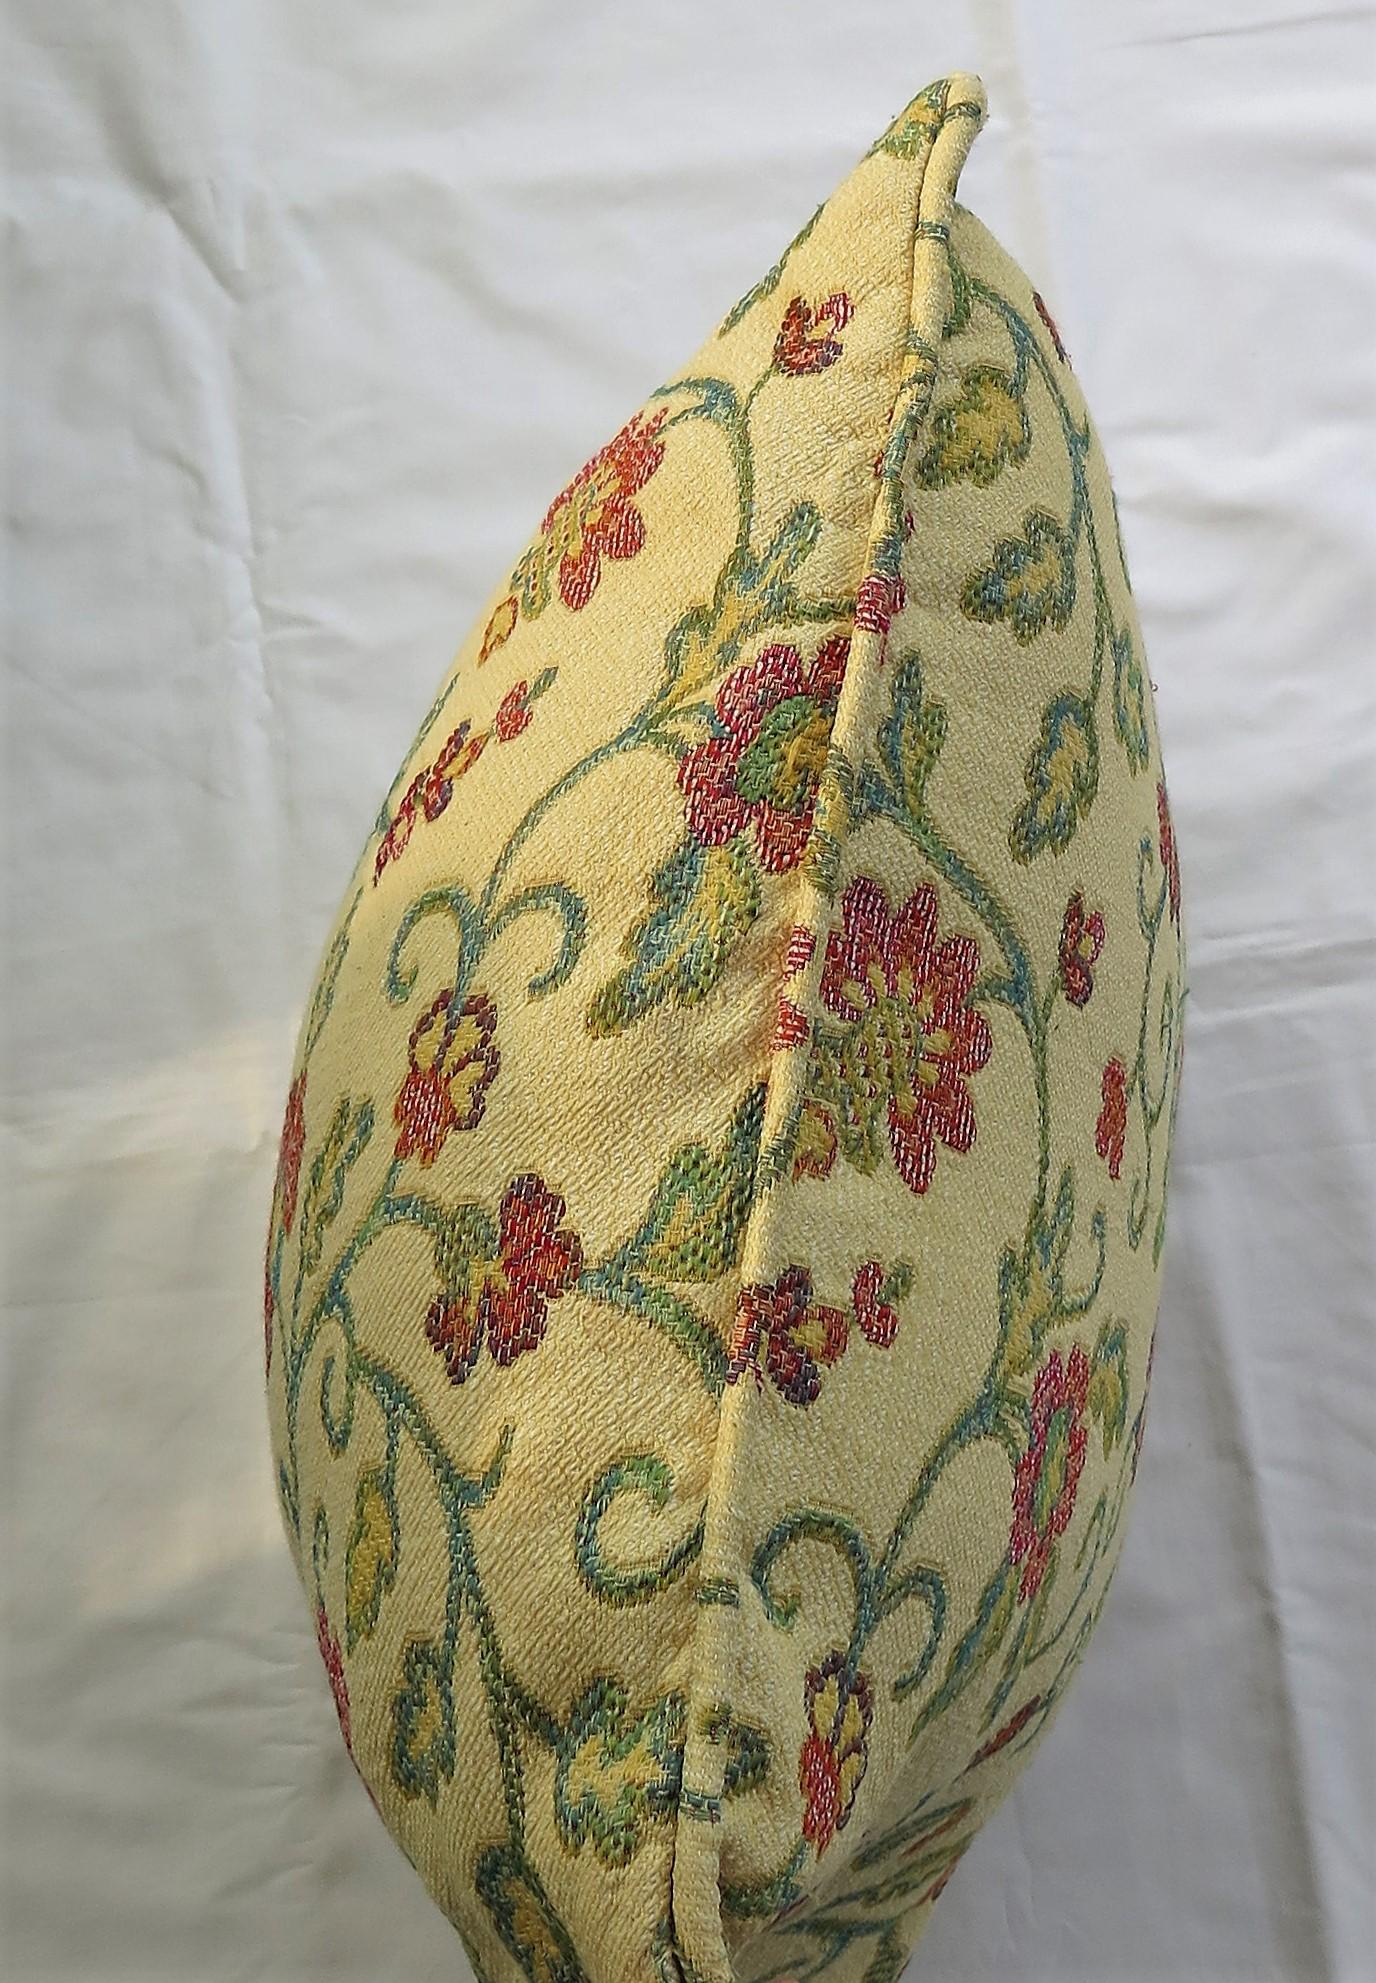 Woven Cushion or Pillow in Art Nouveau Floral Vine Style, 20th Century For Sale 2